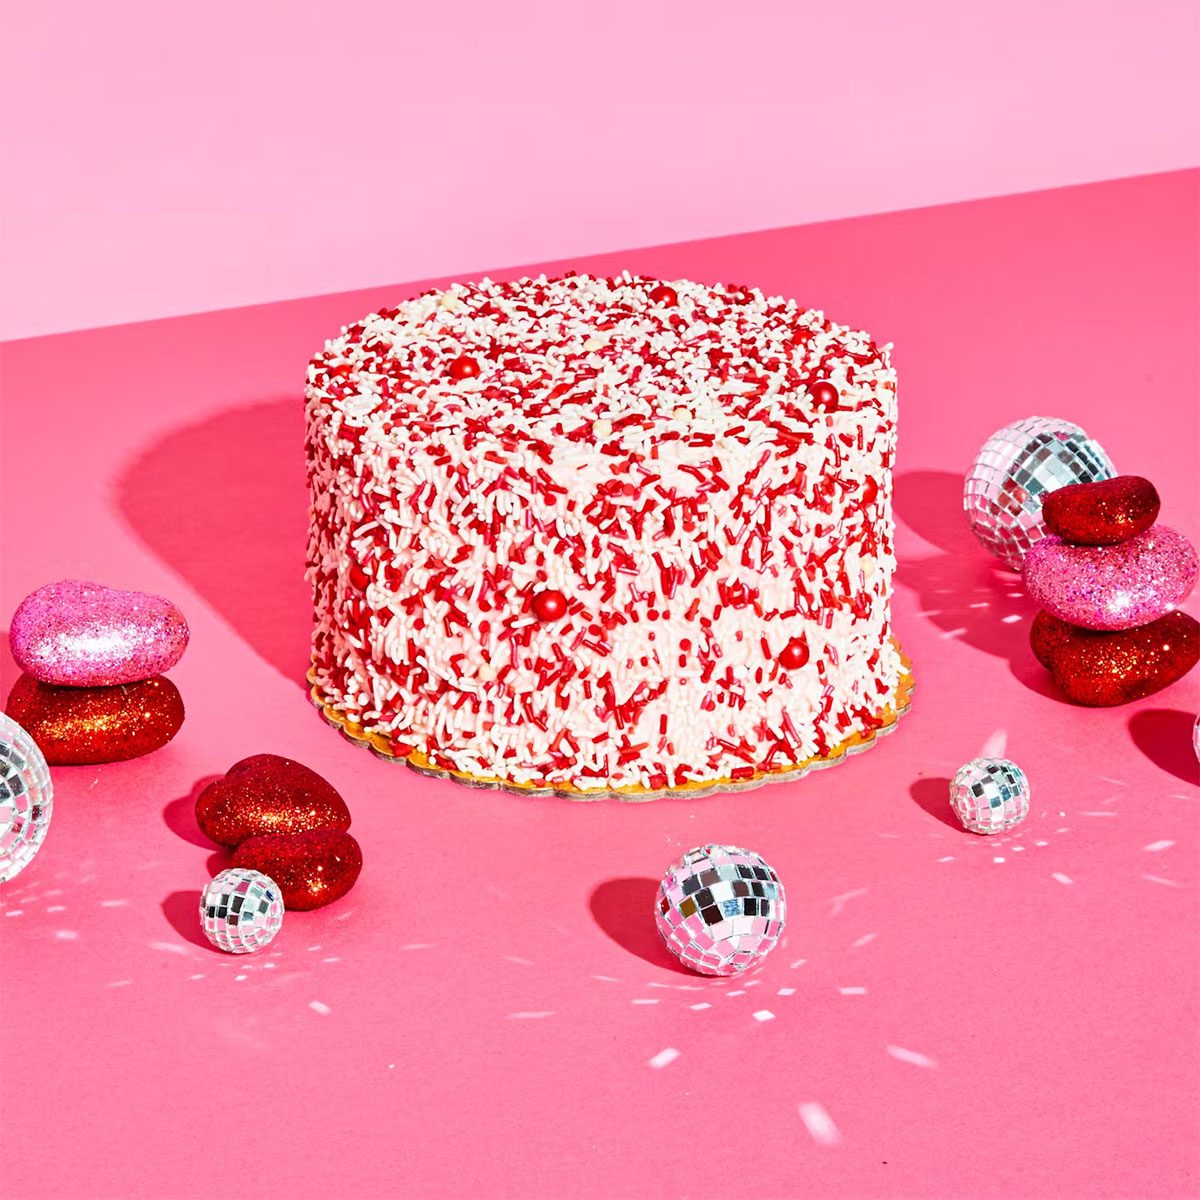 13 Valentine's Day Treats For Chocolate Haters